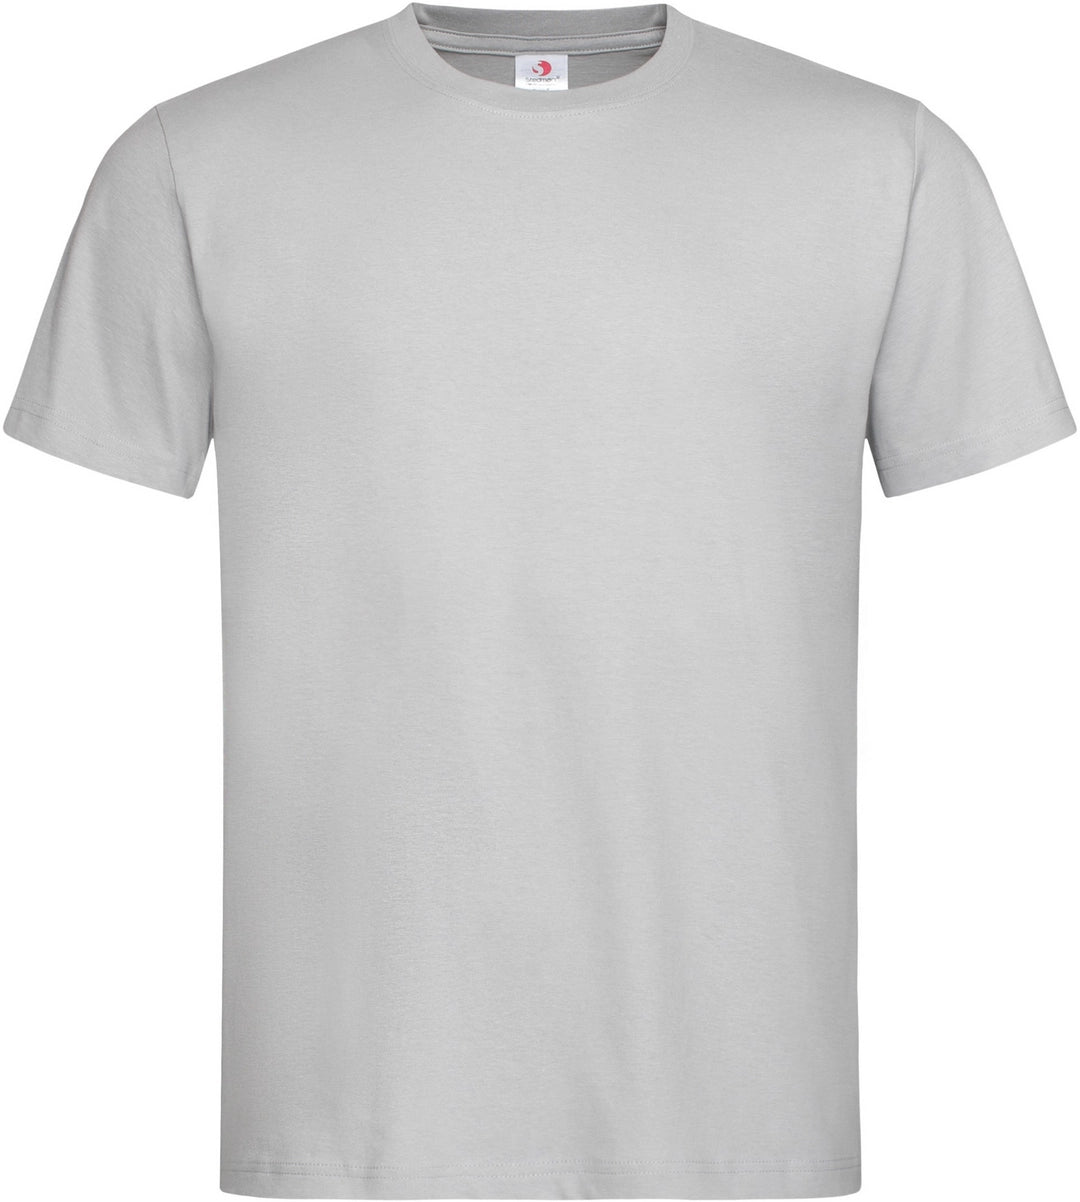 Classic T-Shirt 155gsm Adult Other color - COOZO